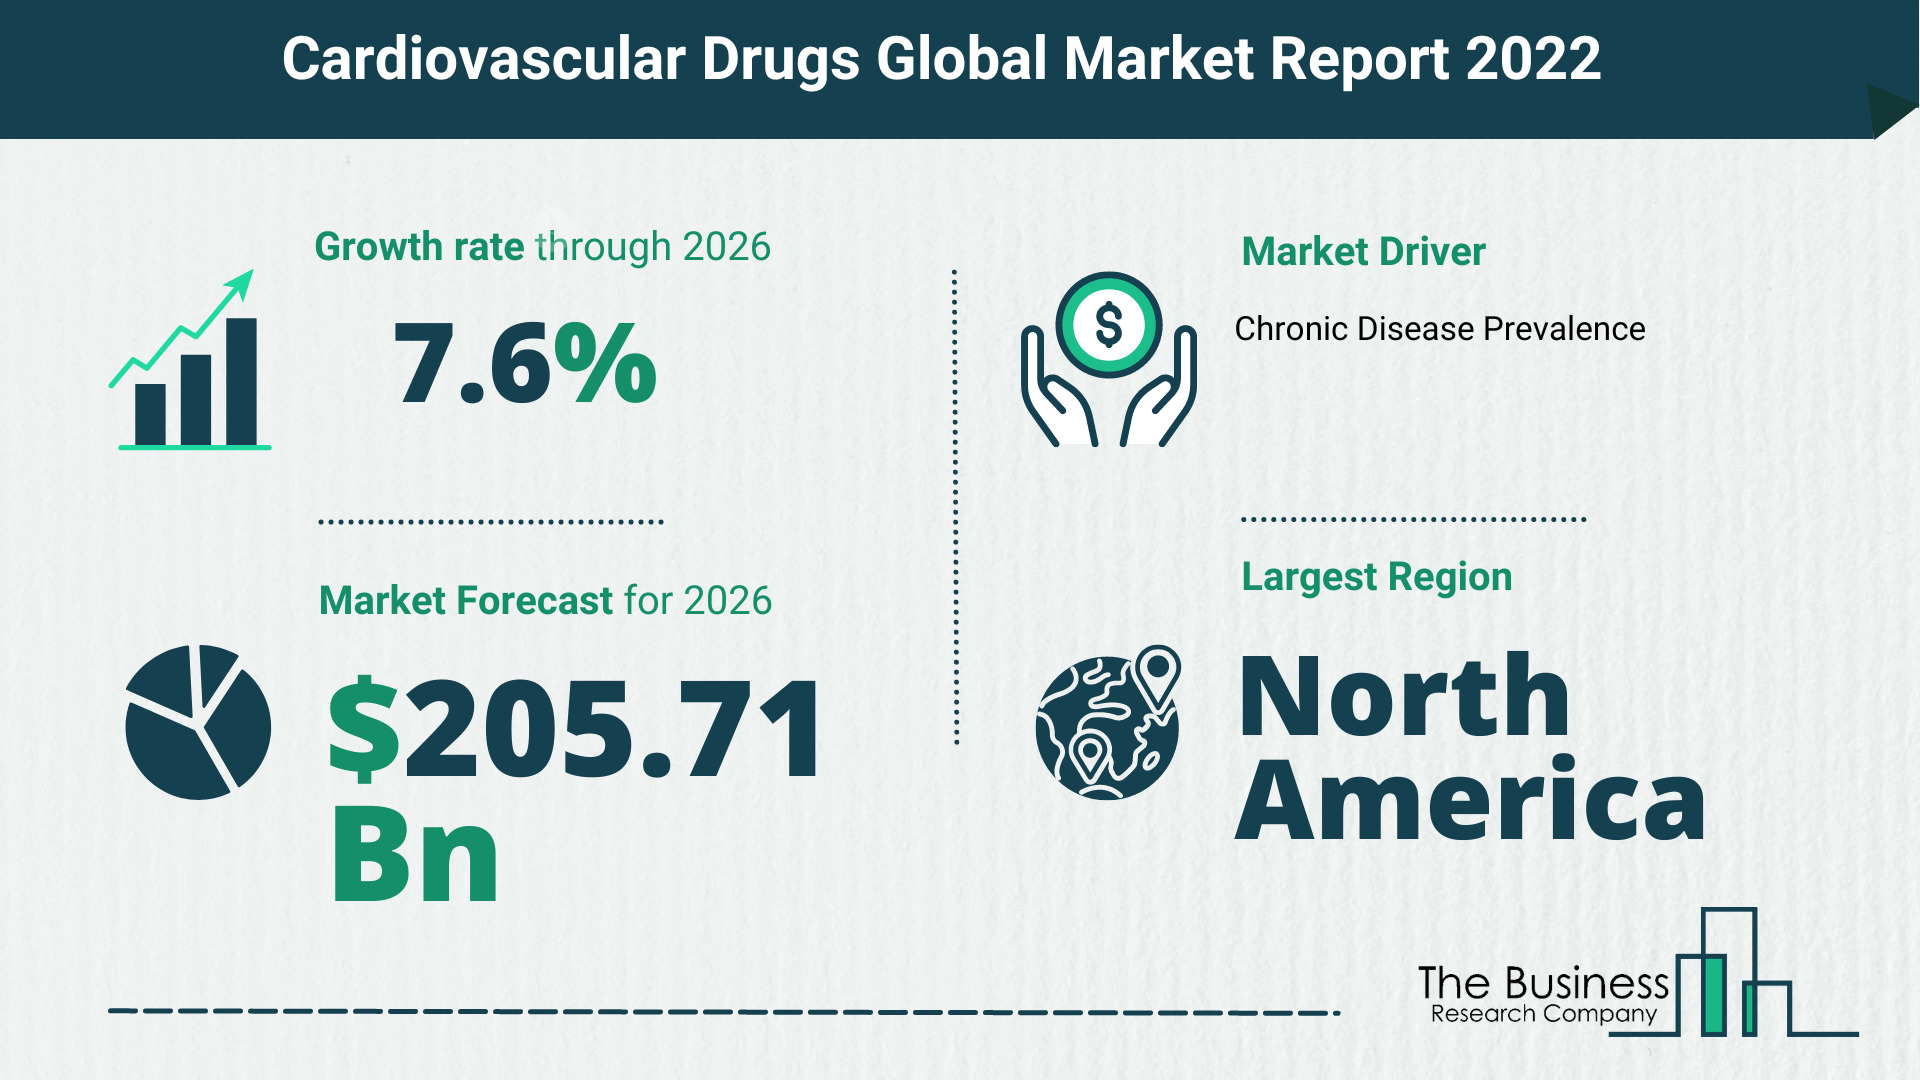 What Is The Cardiovascular Drugs Market Overview In 2022?